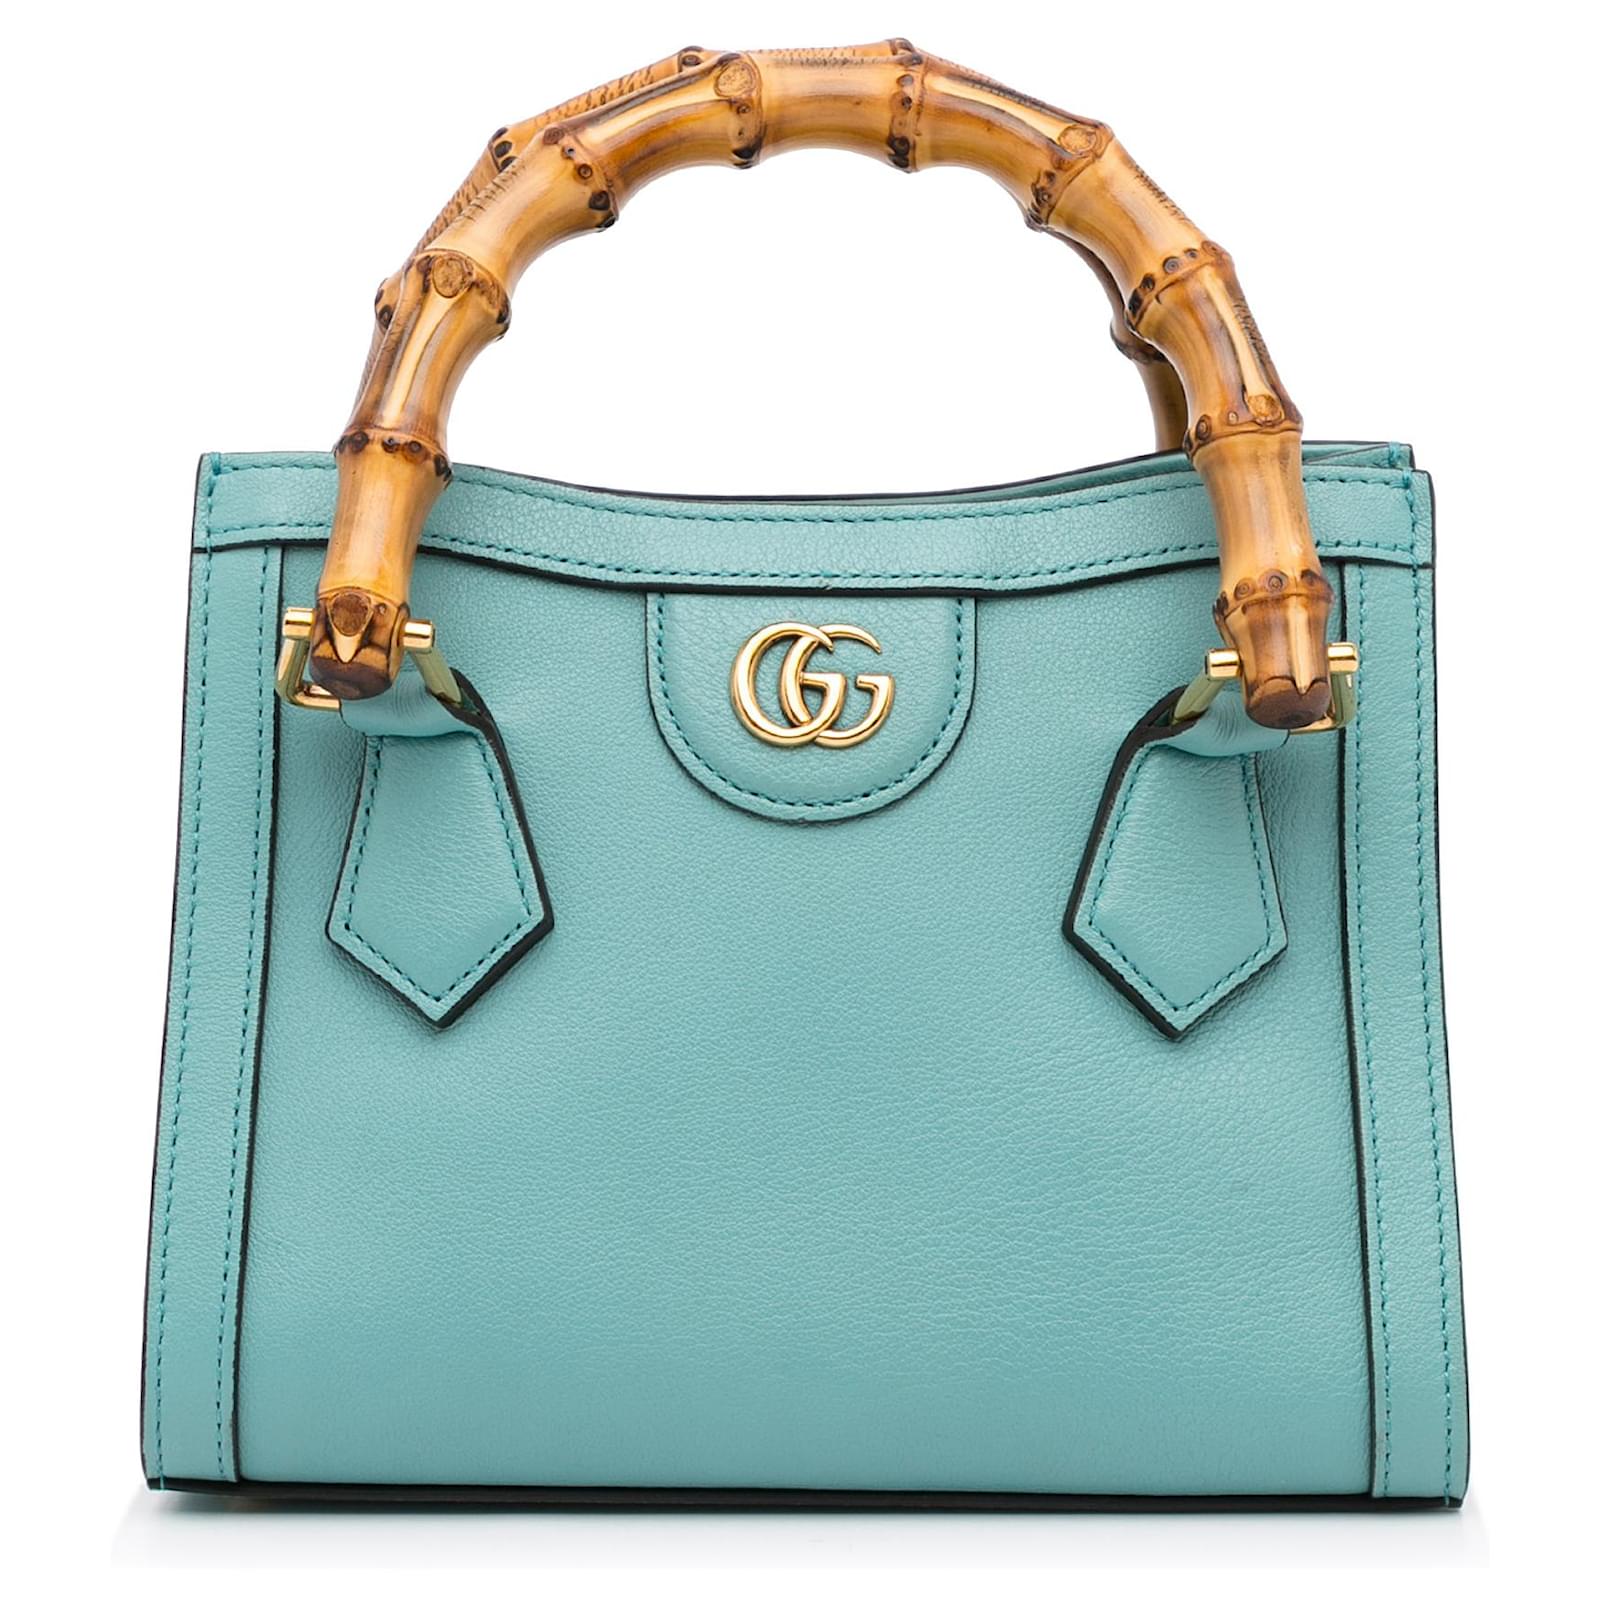 Gucci Green Mini Bamboo Diana Light green Leather Pony-style